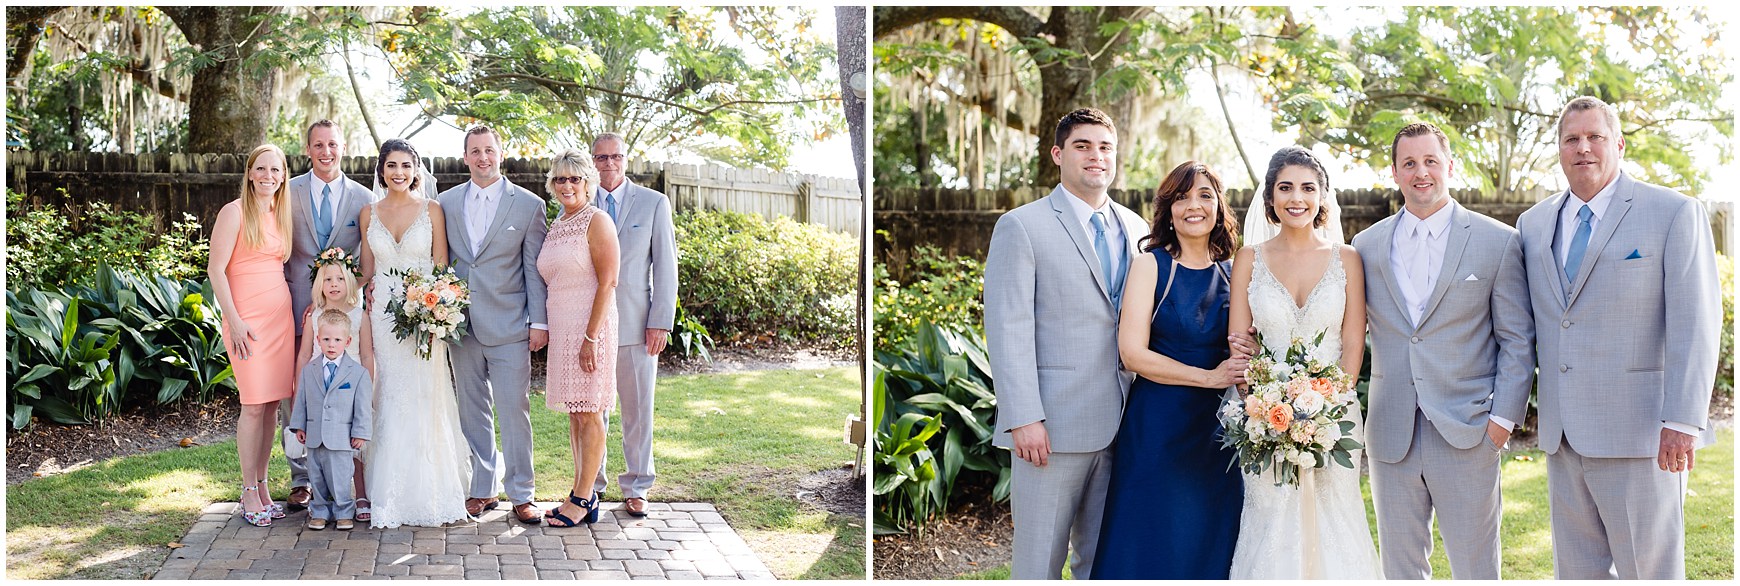 Wedding at Destin Bay House_Indie Pearl Photography_Katie and Andrew_0047.jpg